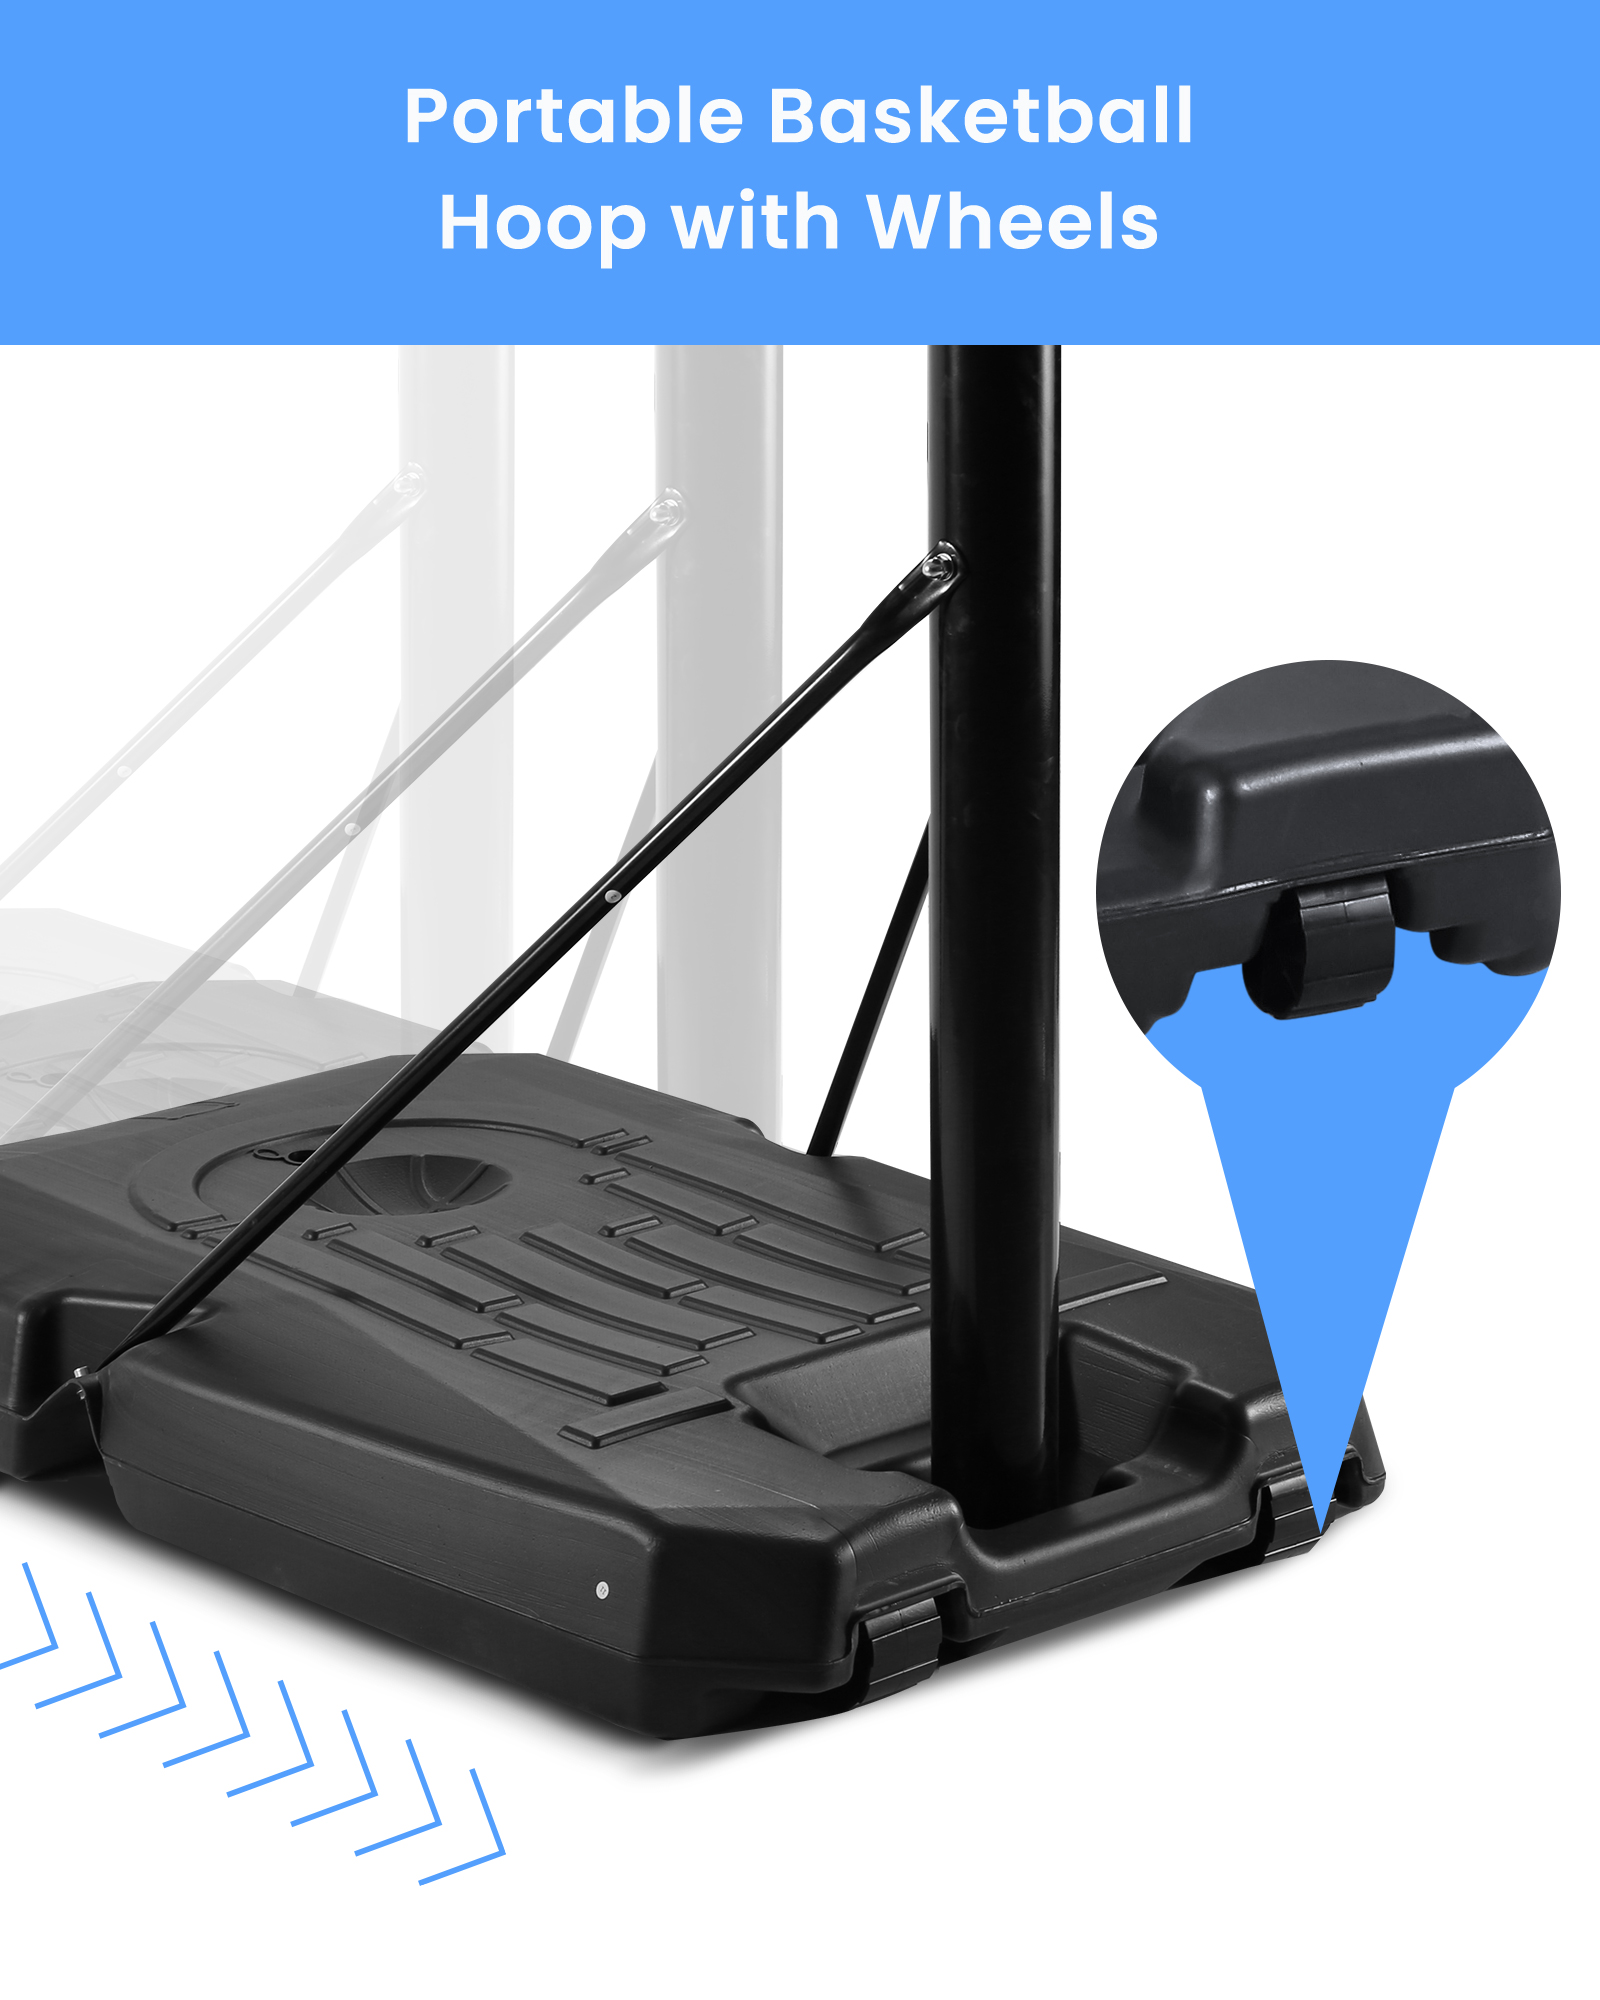 Portable Basketball Hoop Goal Basketball Hoop System Height Adjustable 7 ft. 6 in. - 10 ft. with 44 inch Indoor Outdoor PVC Backboard Material - image 5 of 11